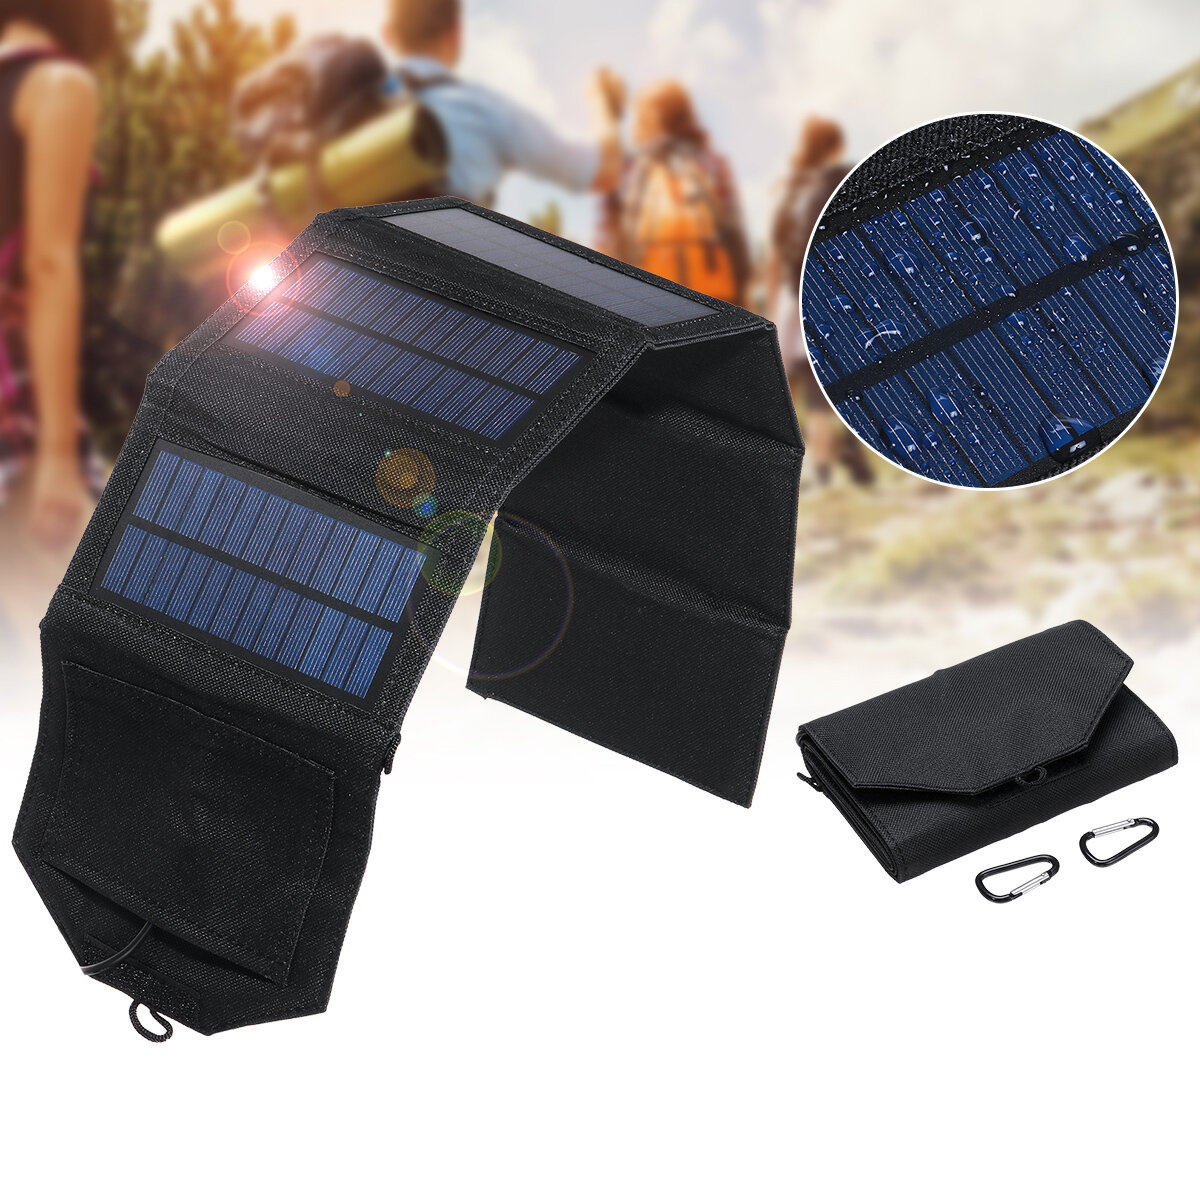 Foldable Solar Panel with USB Port IP65 Waterproof Portable Solar Charging High Efficiency for Camping Hiking Climbing Phone Charging